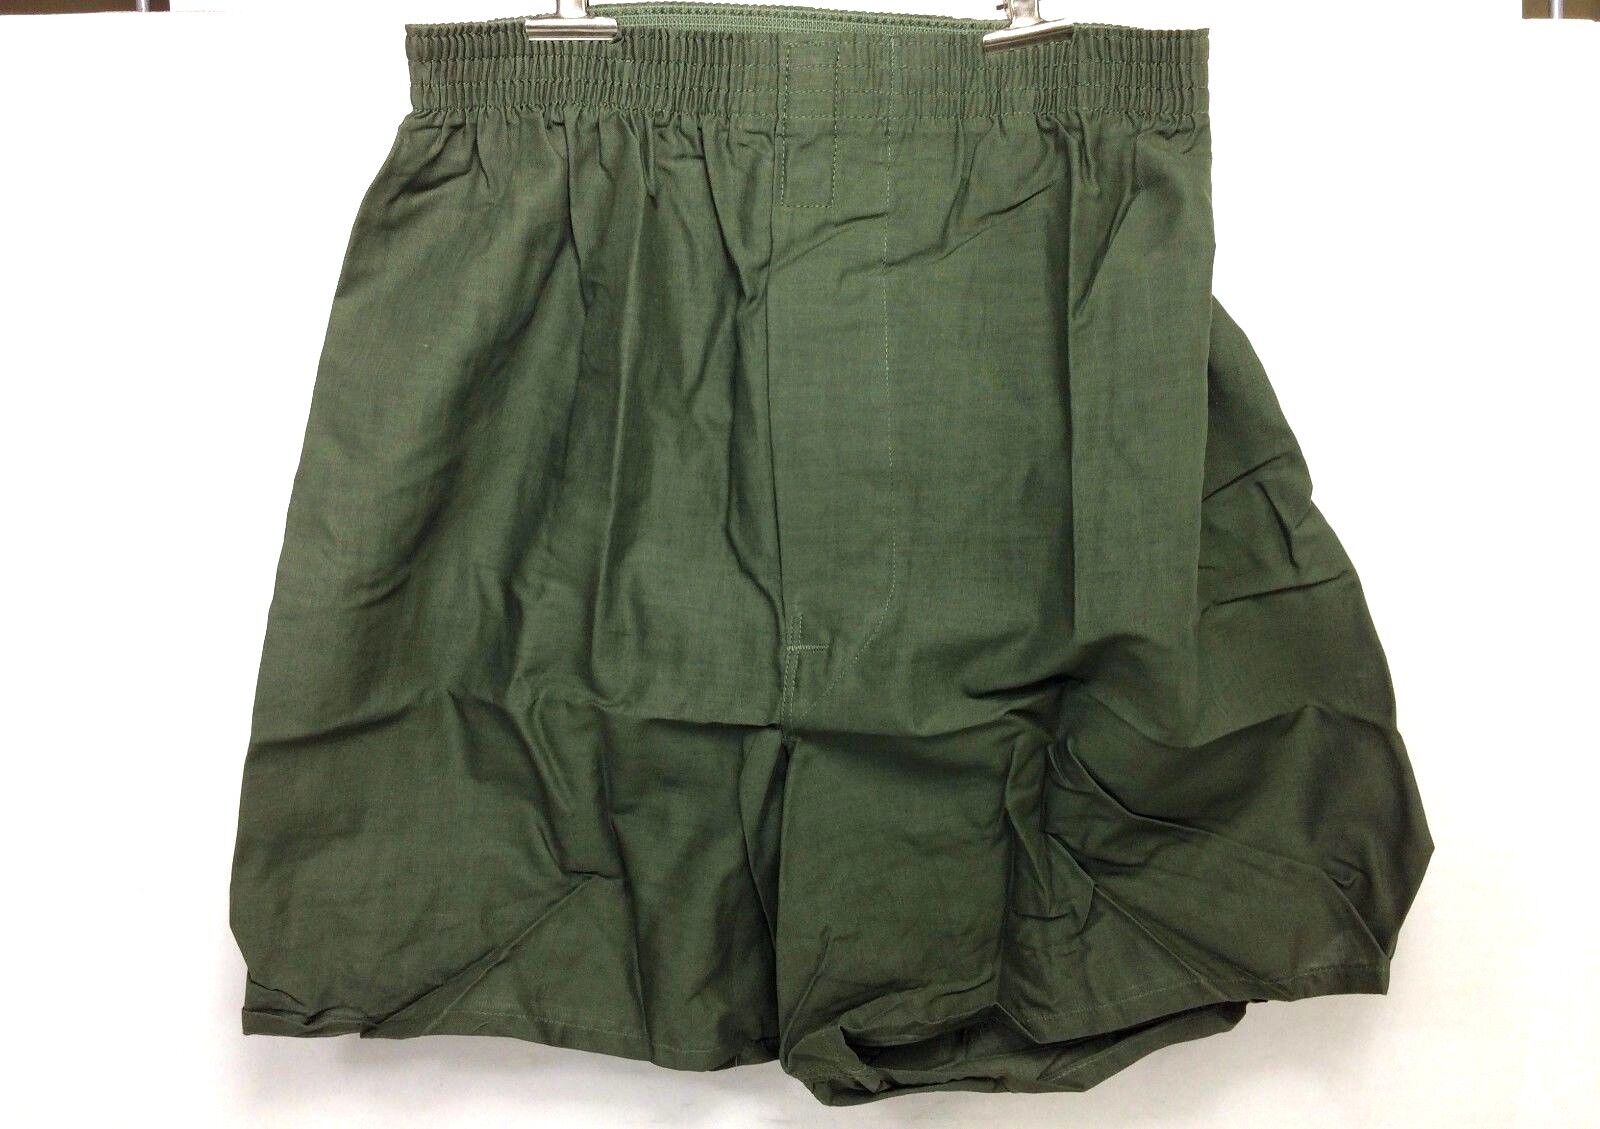 Boxer Shorts, Vietnam Issue, X-Small 3pair Package